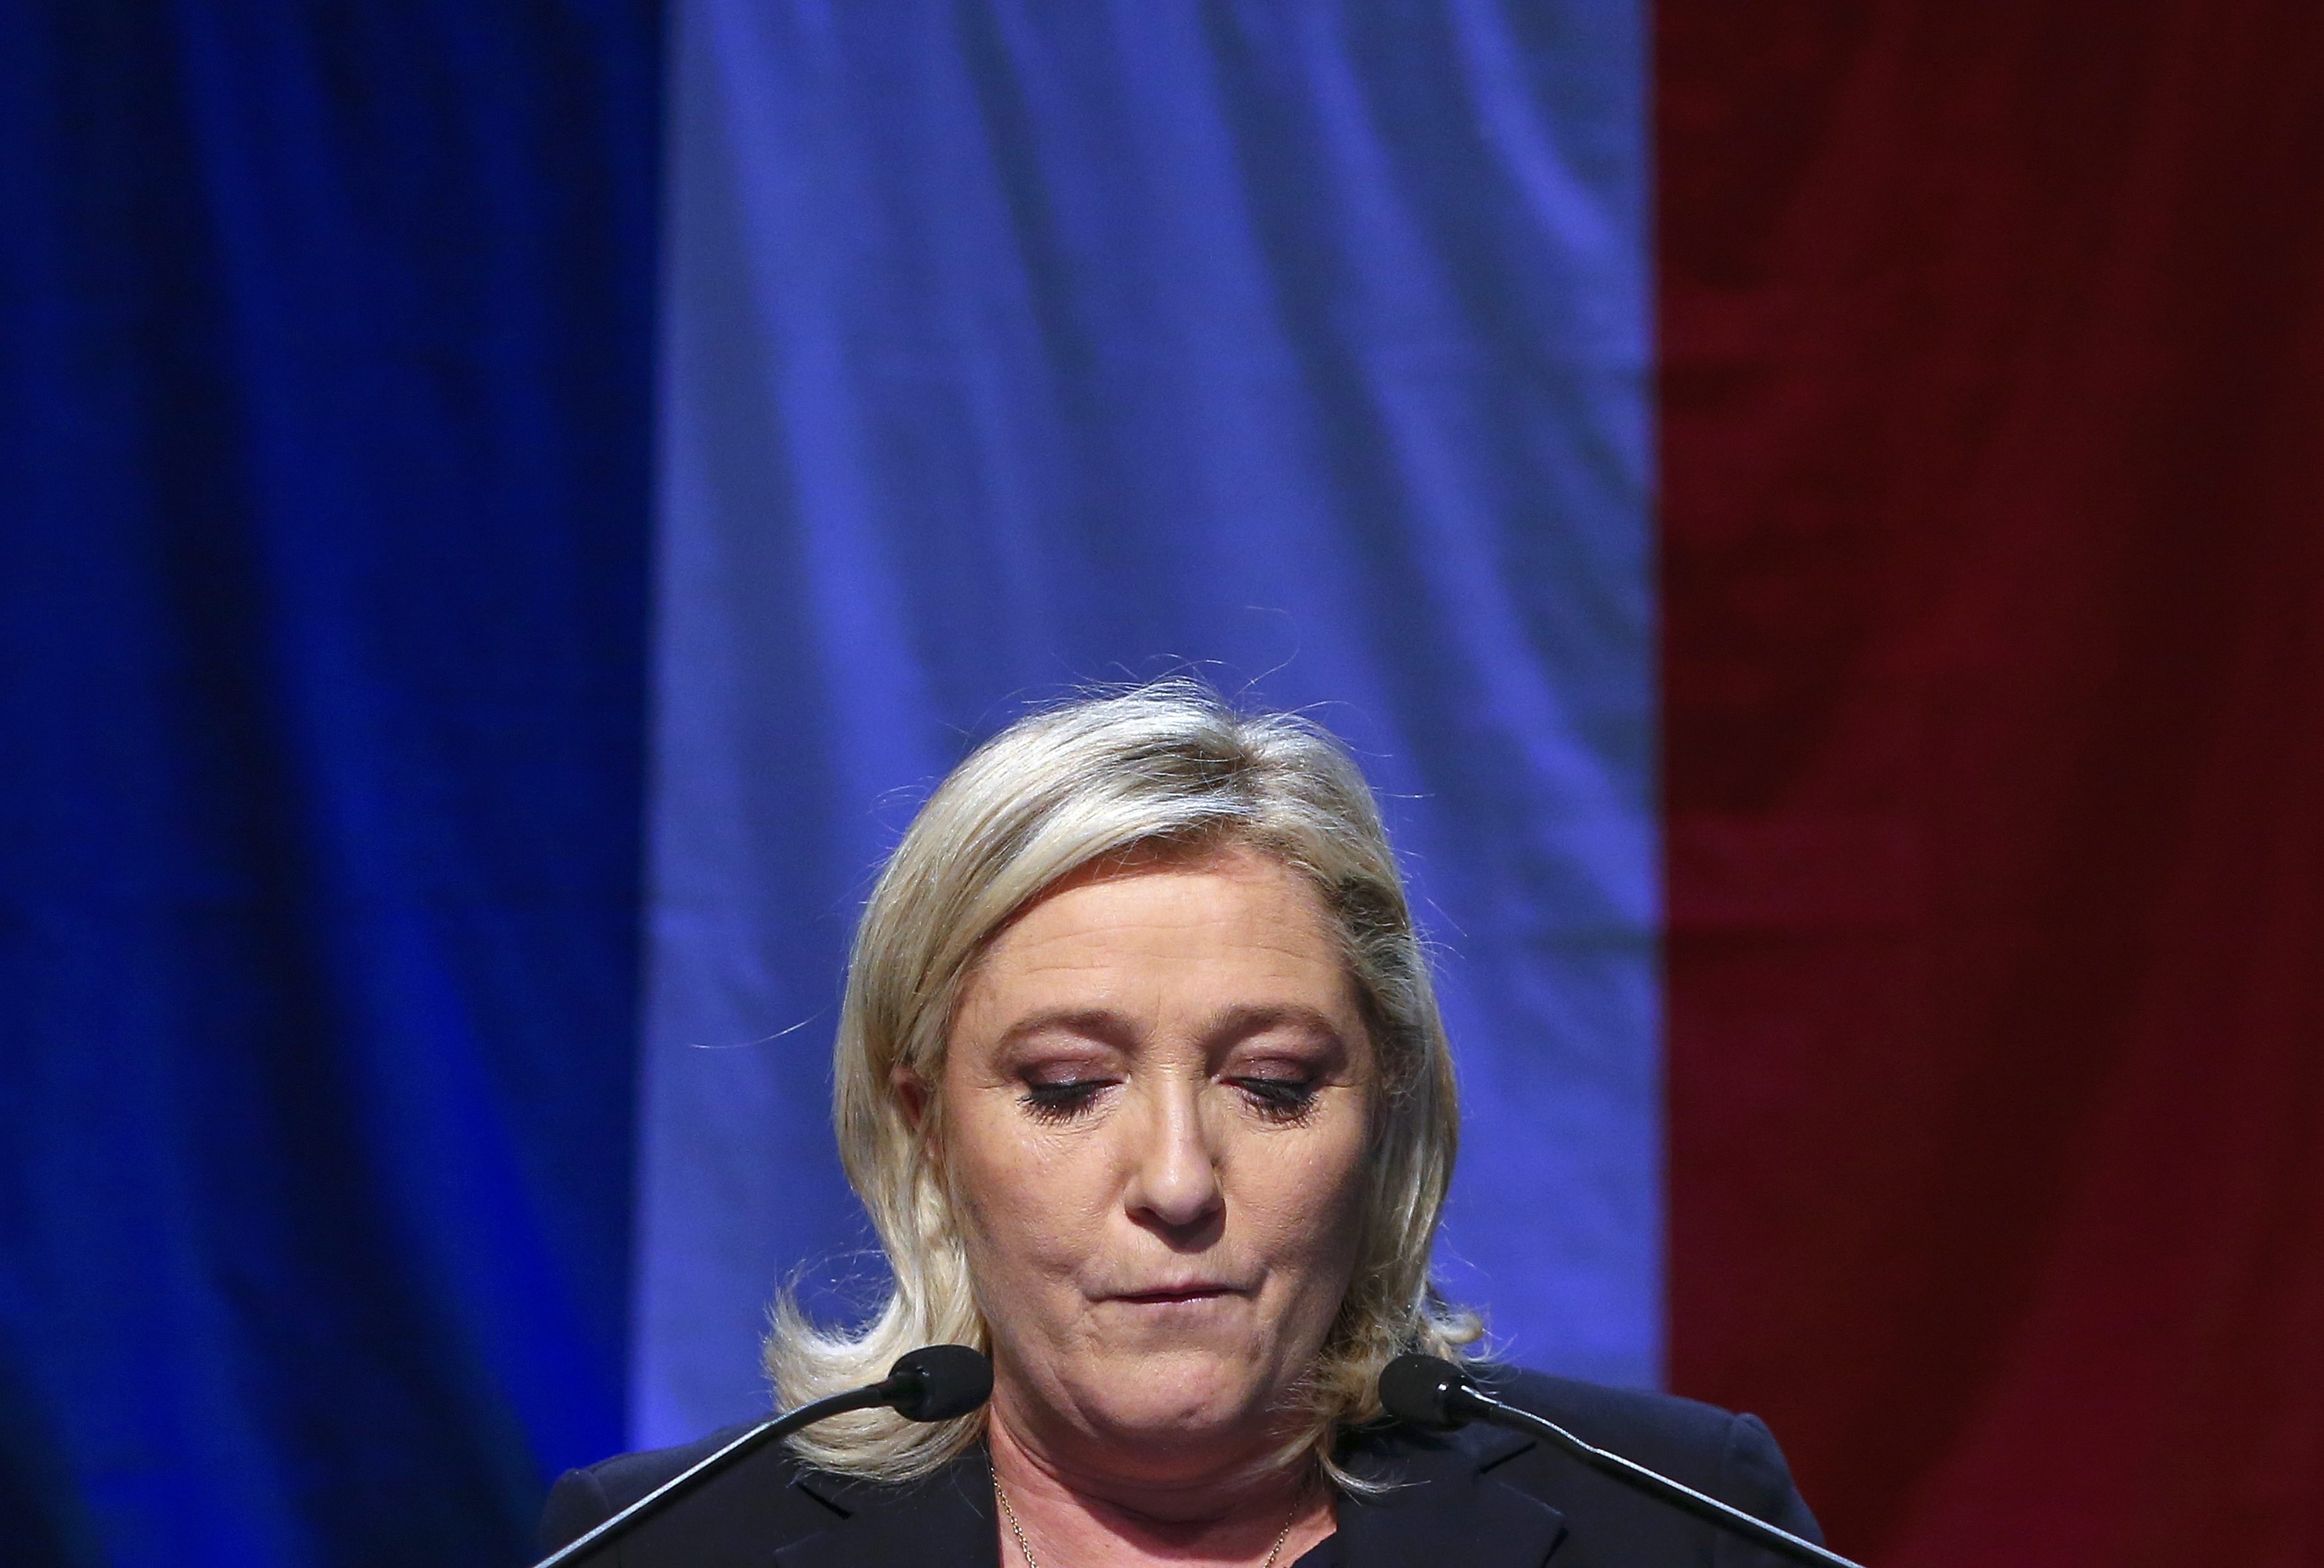 Marine Le Pen, French National Front (FN) political party leader and candidate for the National Front in the Nord-Pas-de-Calais-Picardie region, delivers a speech after results in the second-round regional elections in Henin-Beaumont, France, Dec. 13, 2015. (Yves Herman—Reuters)